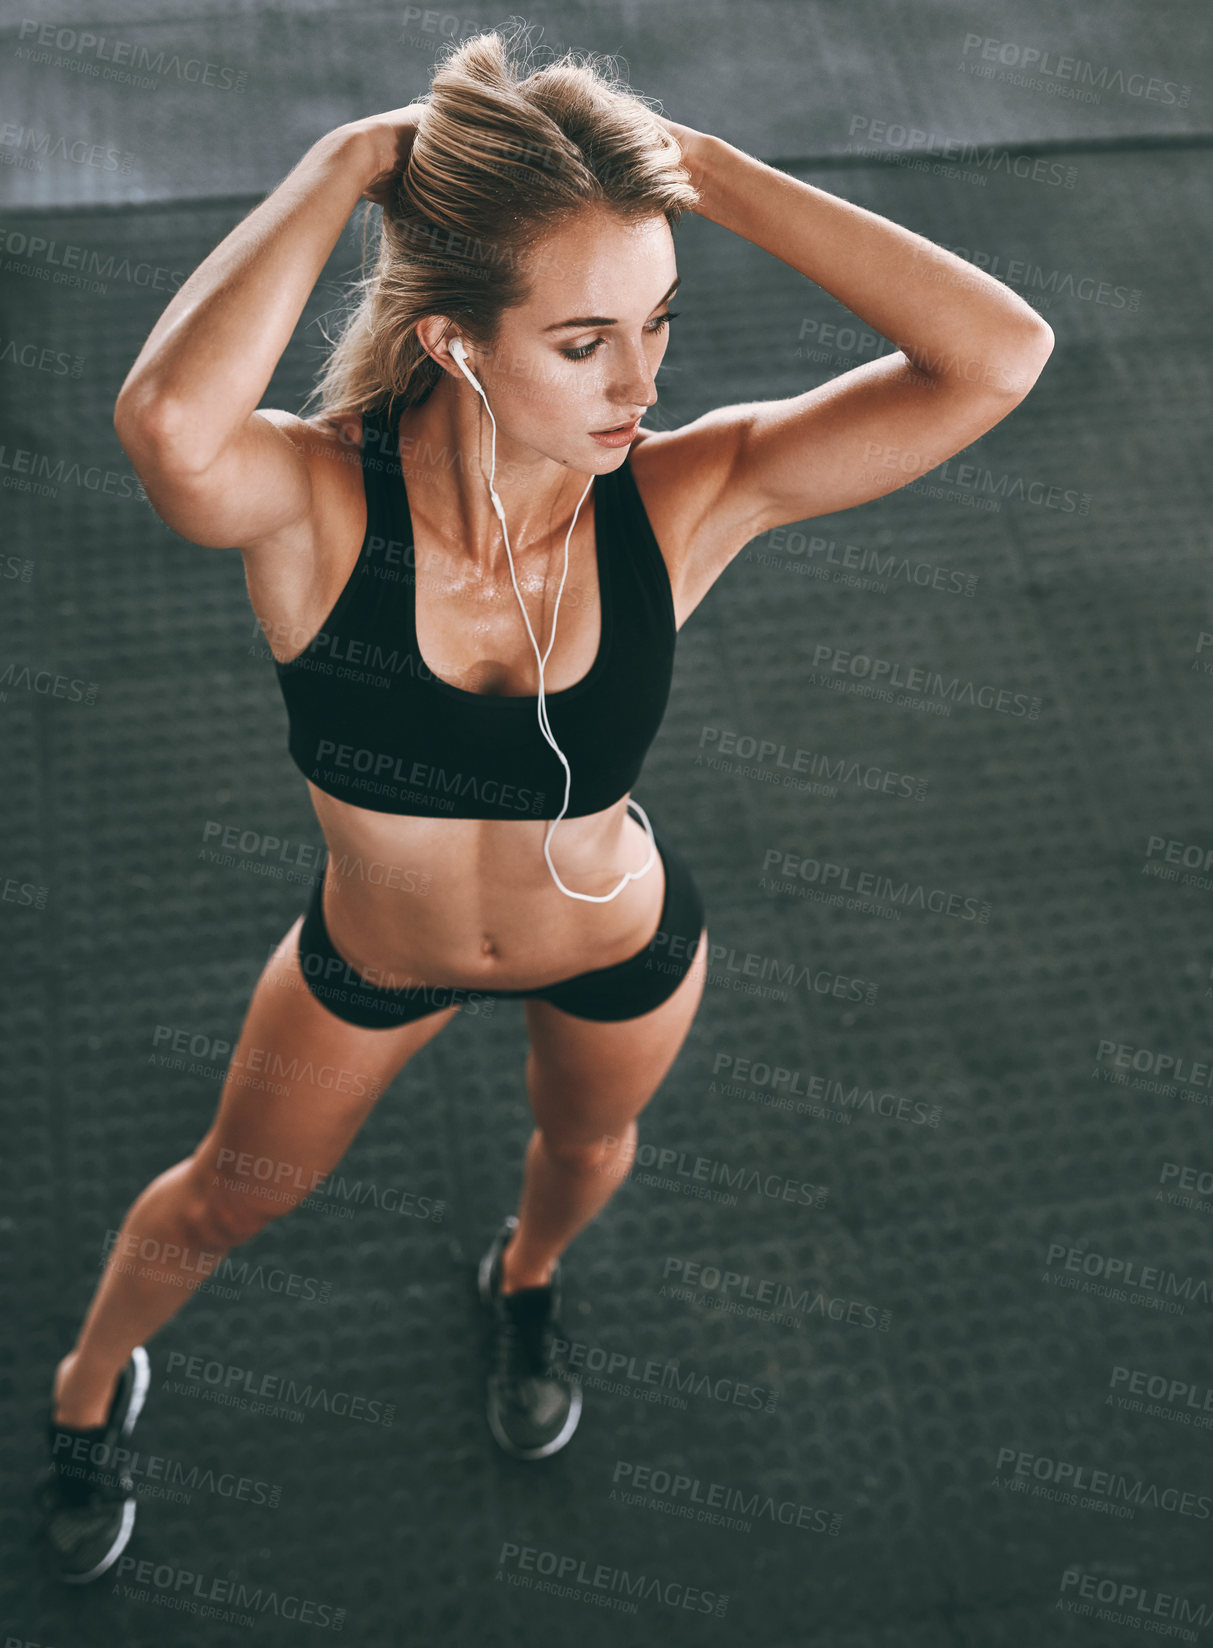 Buy stock photo Shot of a well-built woman posing in a gym